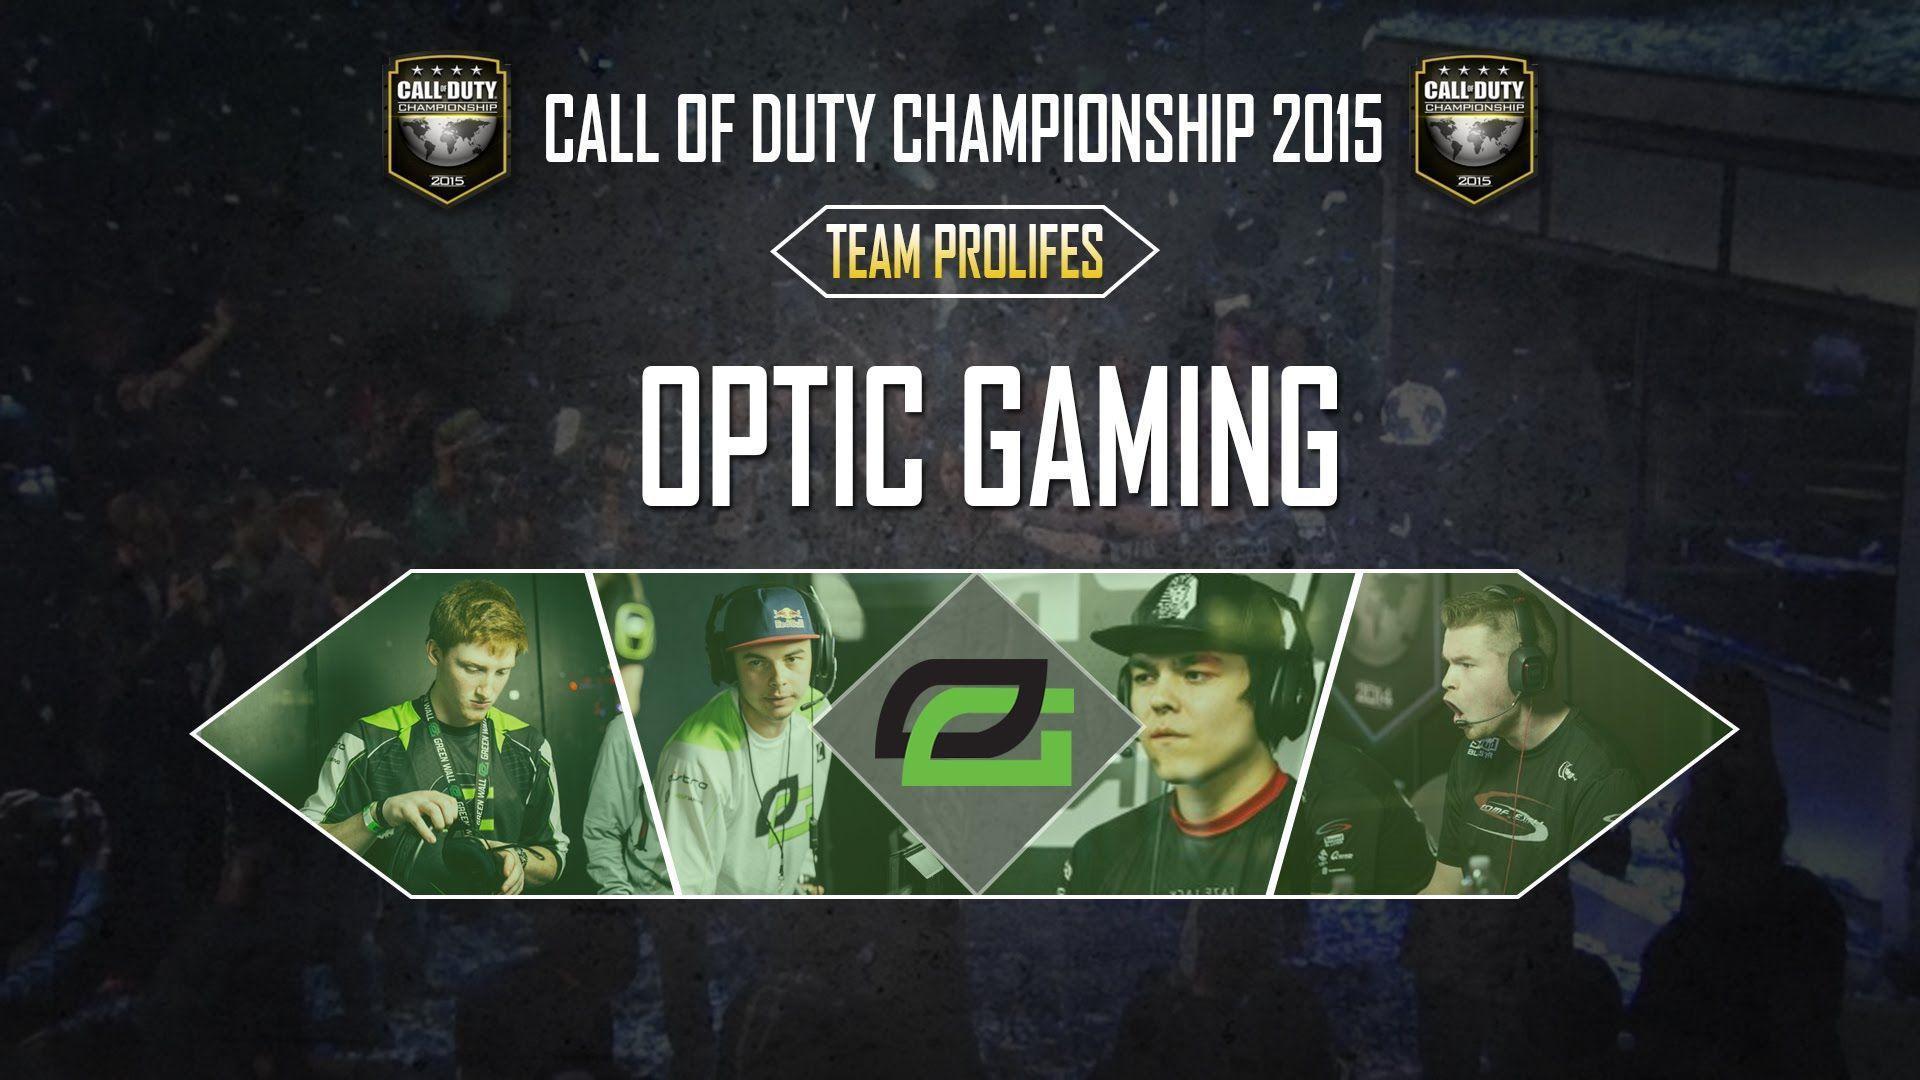 Call of Duty Championship 2015. Team Profiles. OpTic Gaming